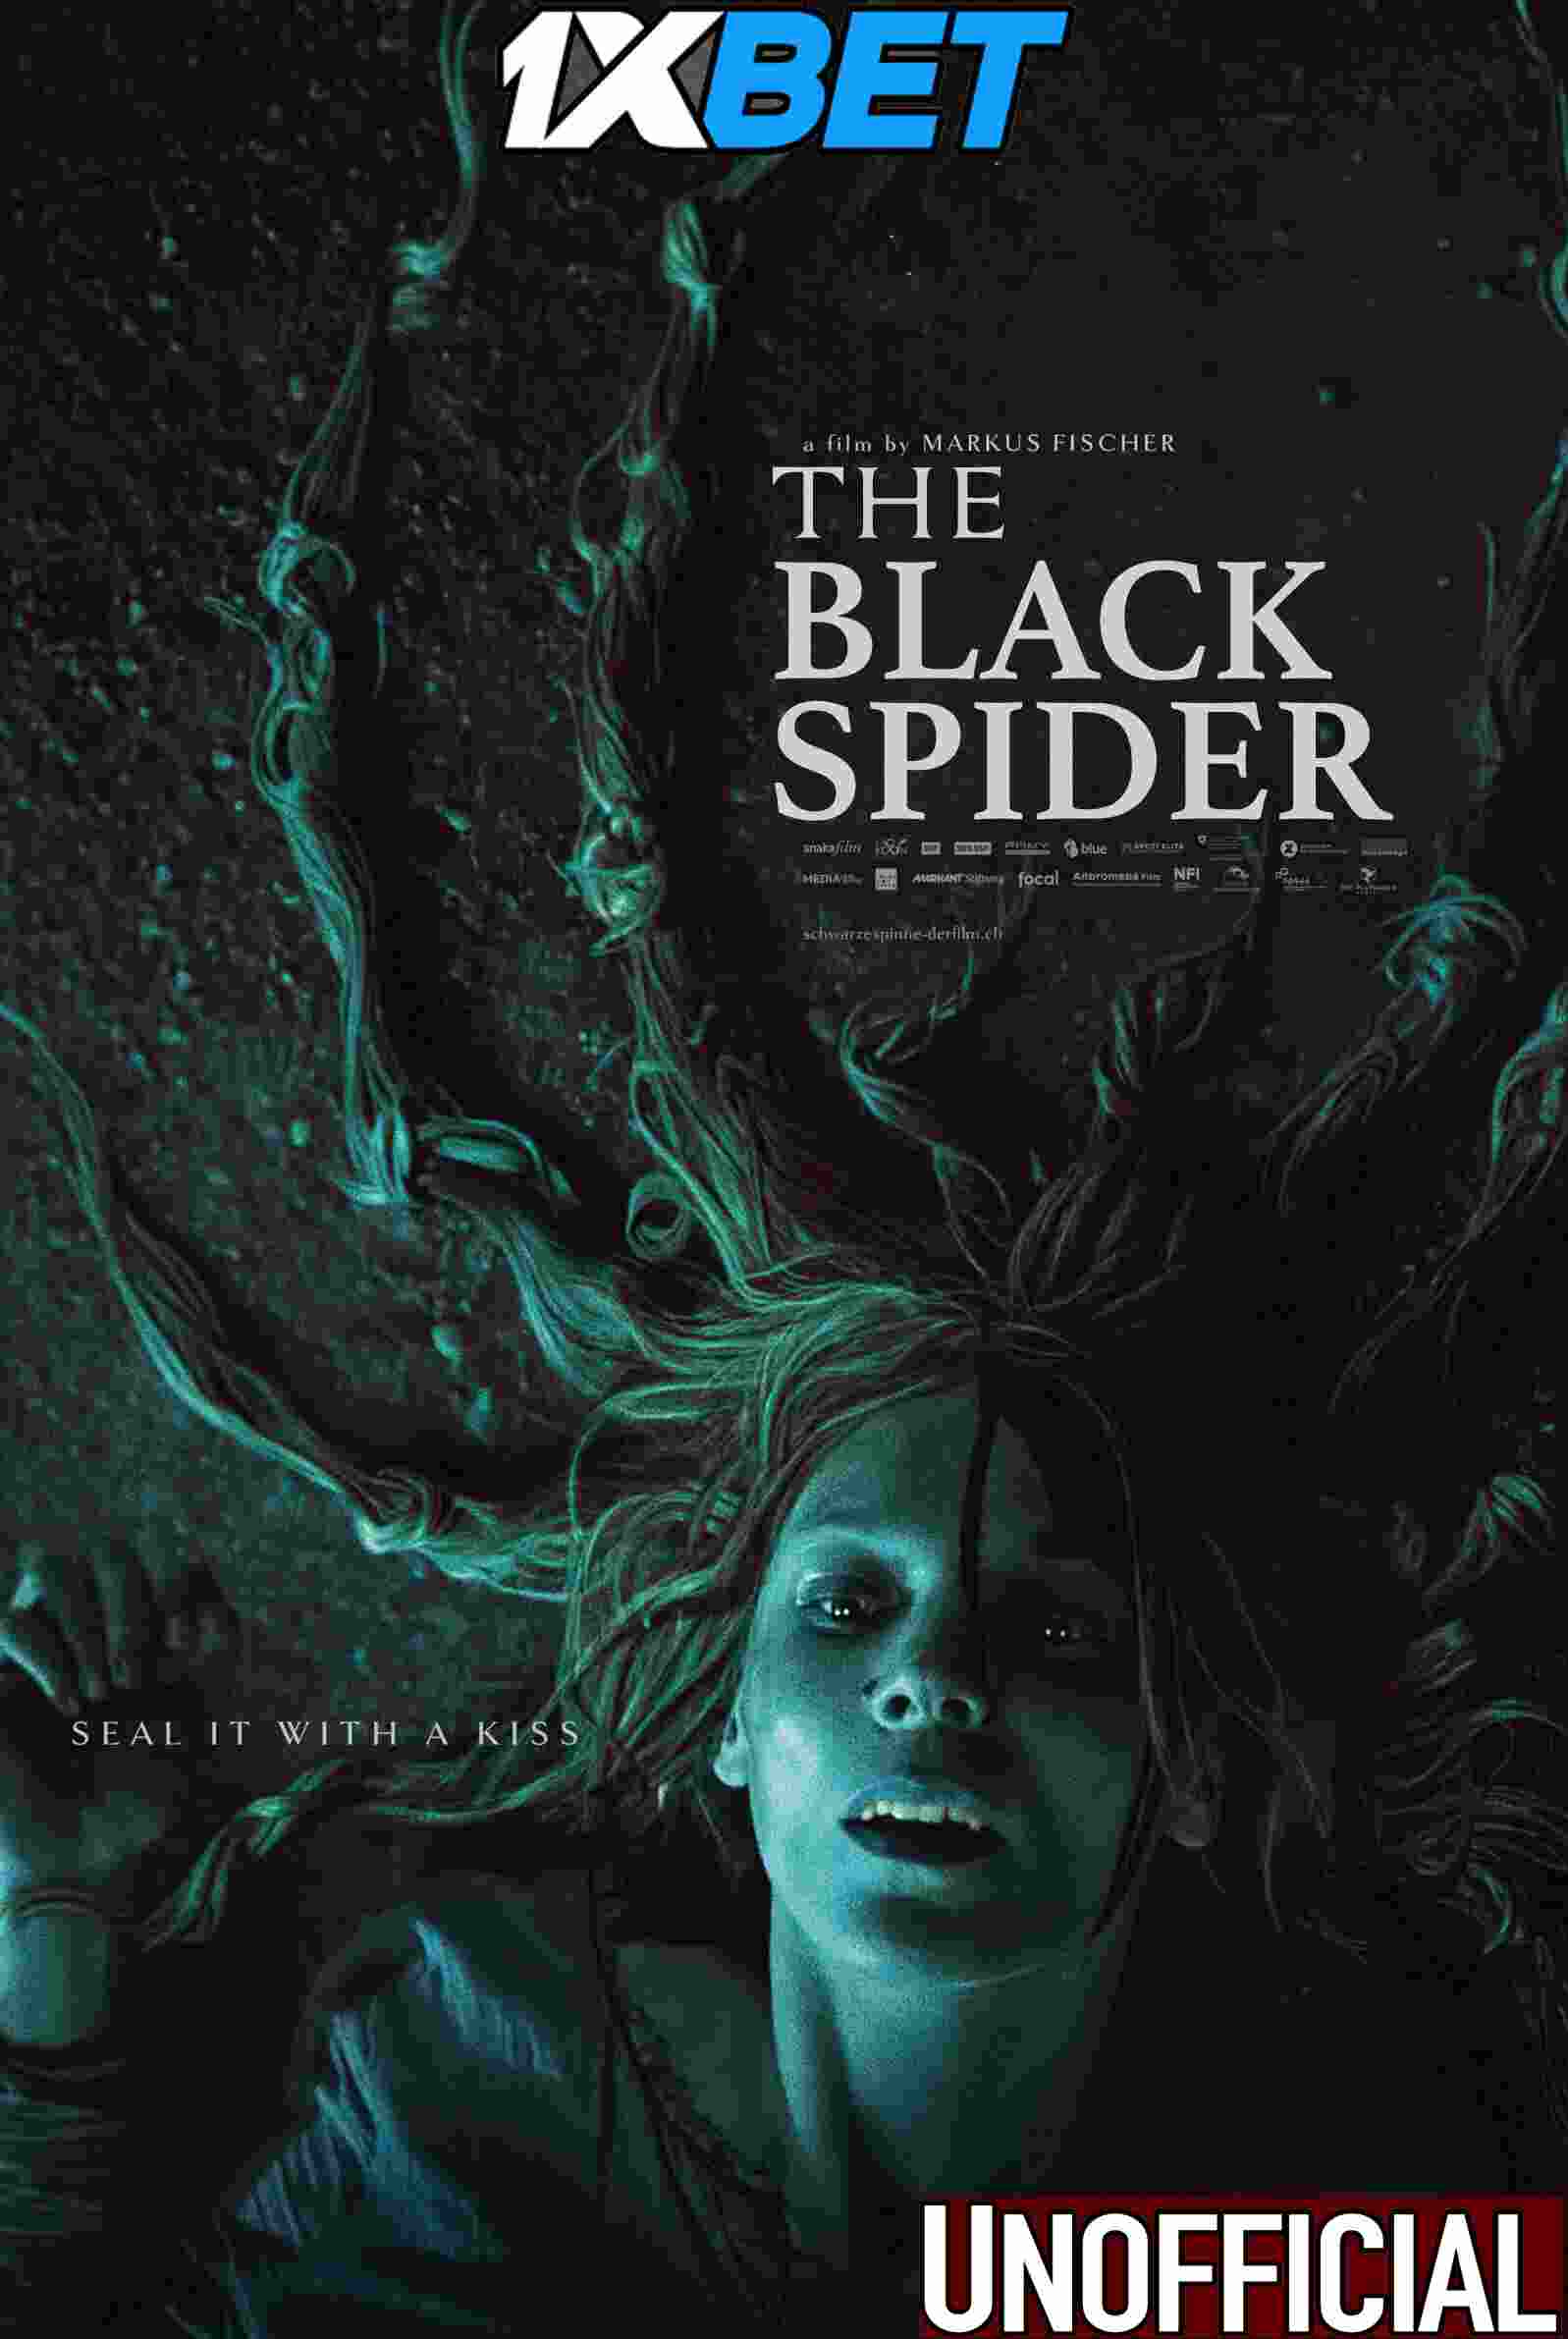 Download The Black Spider (2022) Quality 720p & 480p Dual Audio [Hindi Dubbed] The Black Spider Full Movie On KatMovieHD